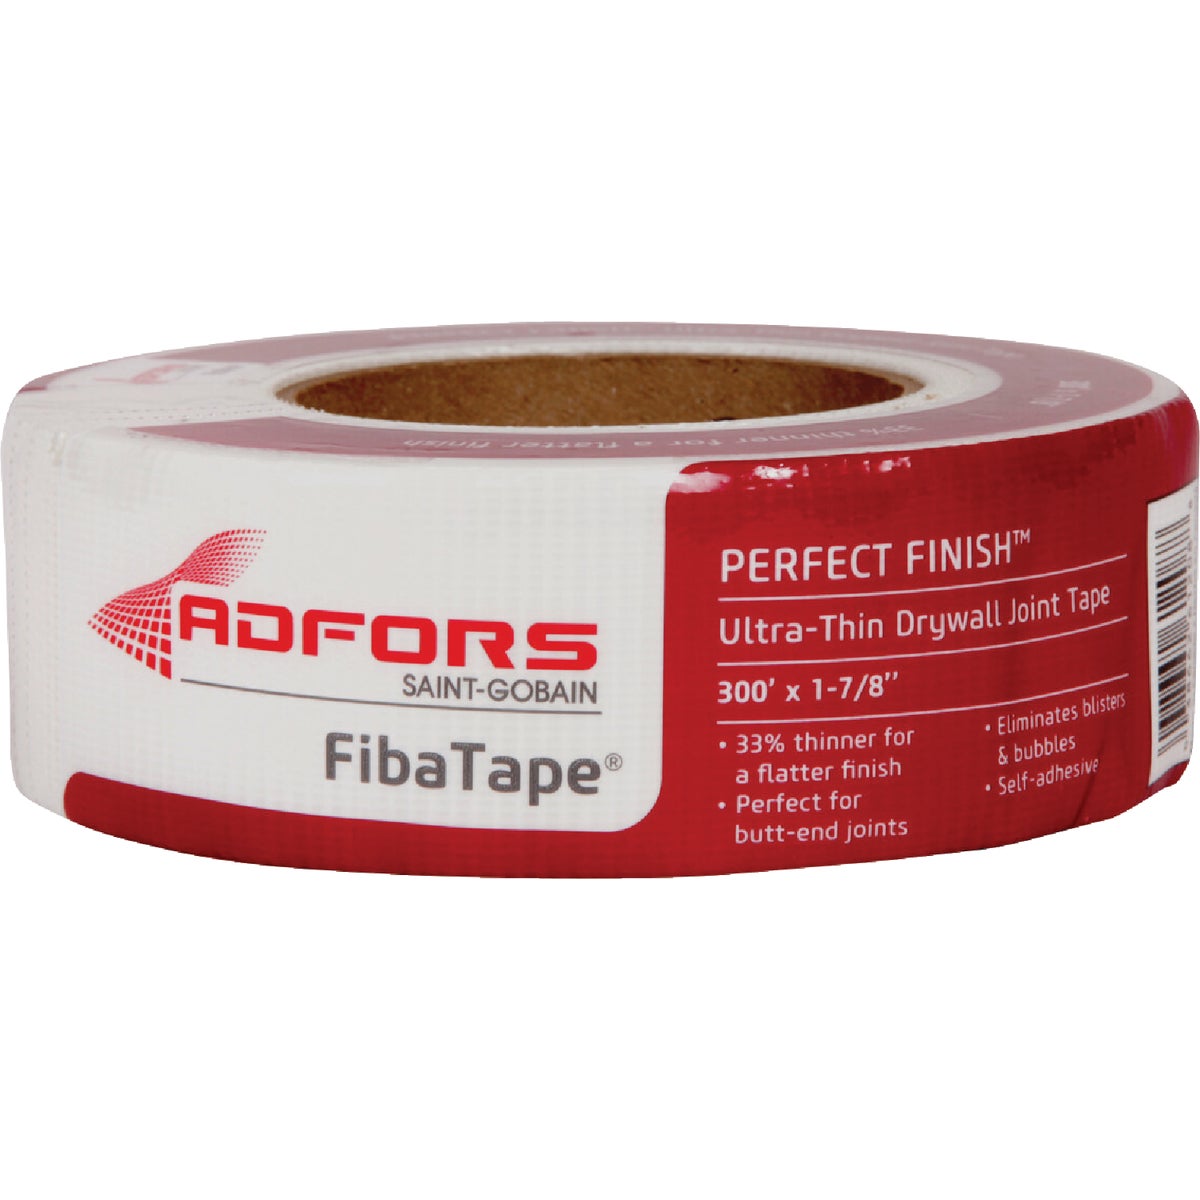 Item 273251, Self-adhesive joint tape for all finishing and wall repair applications.